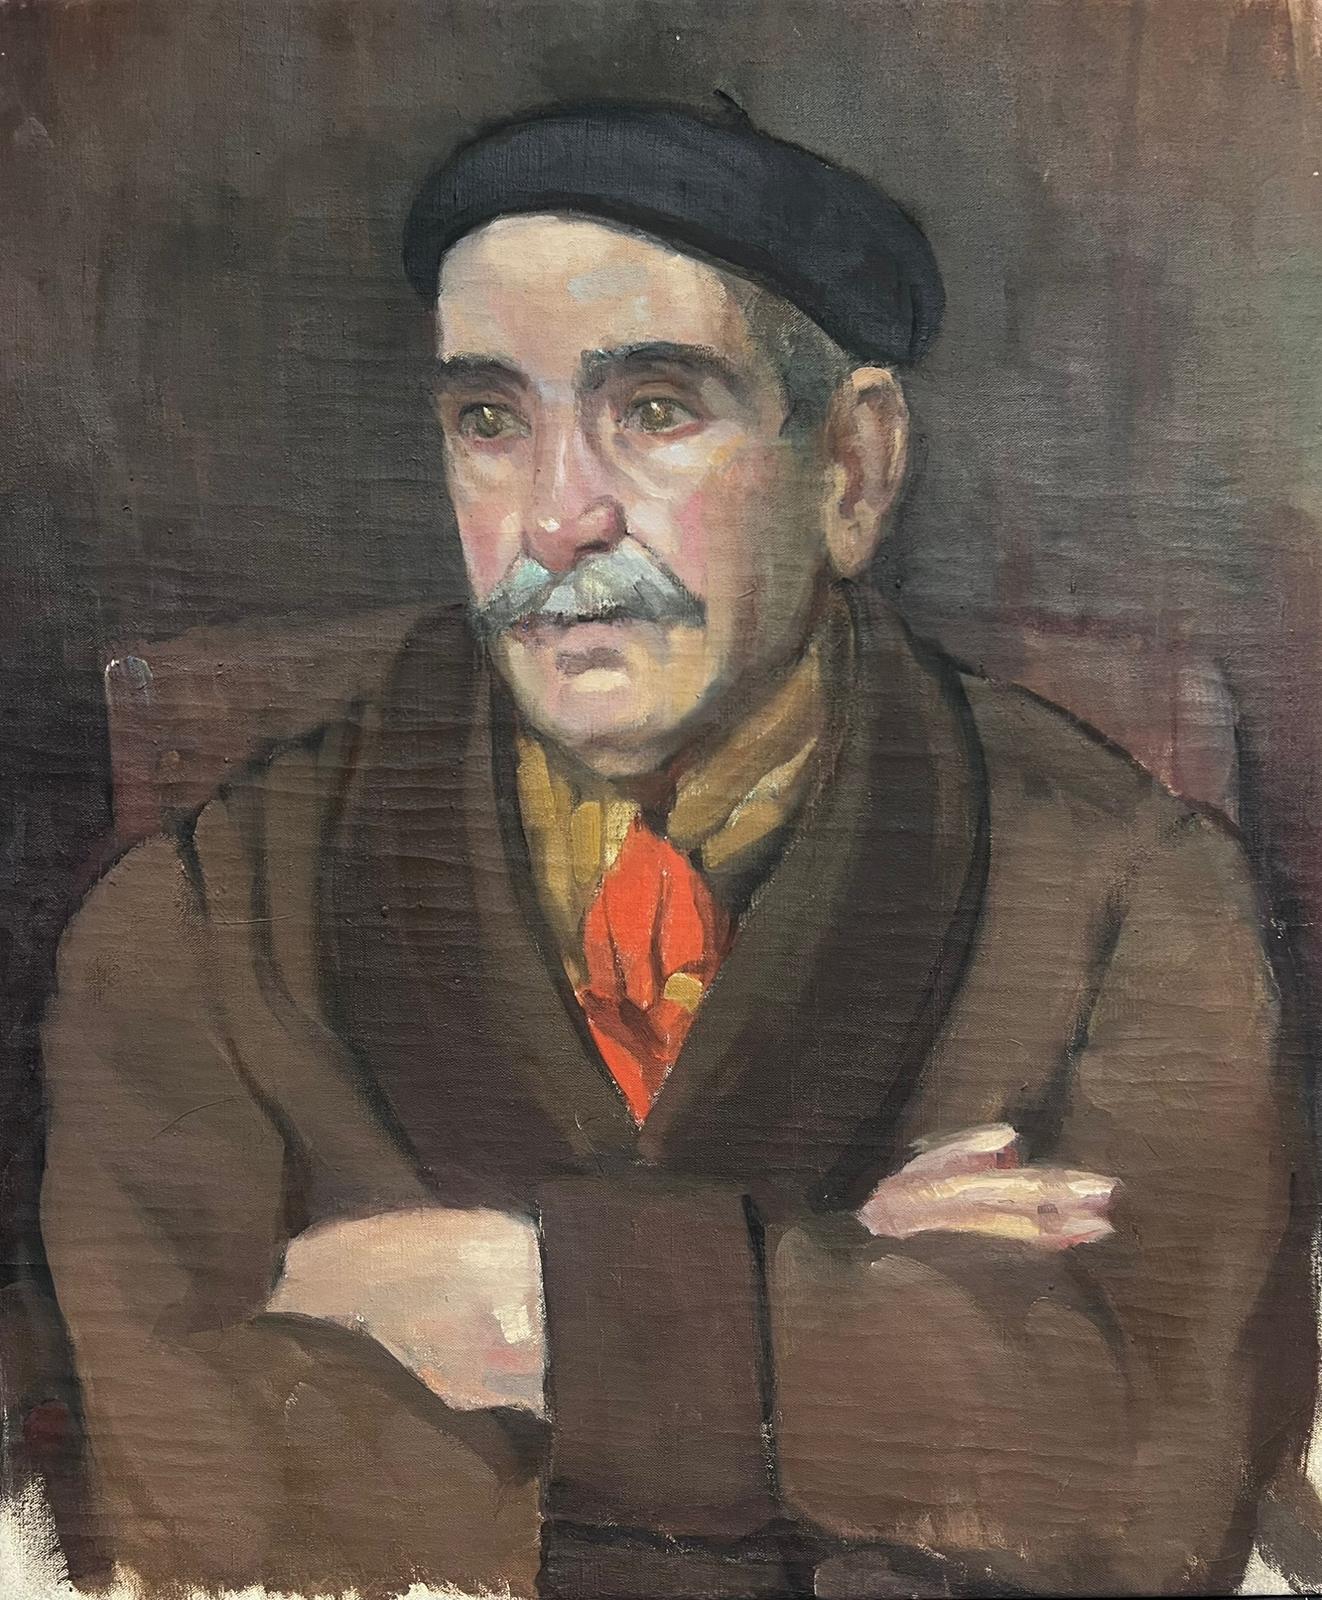 Louise Alix Portrait Painting - 1940's French Oil Painting Portrait of Man in Beret & Neckerchief Tie 